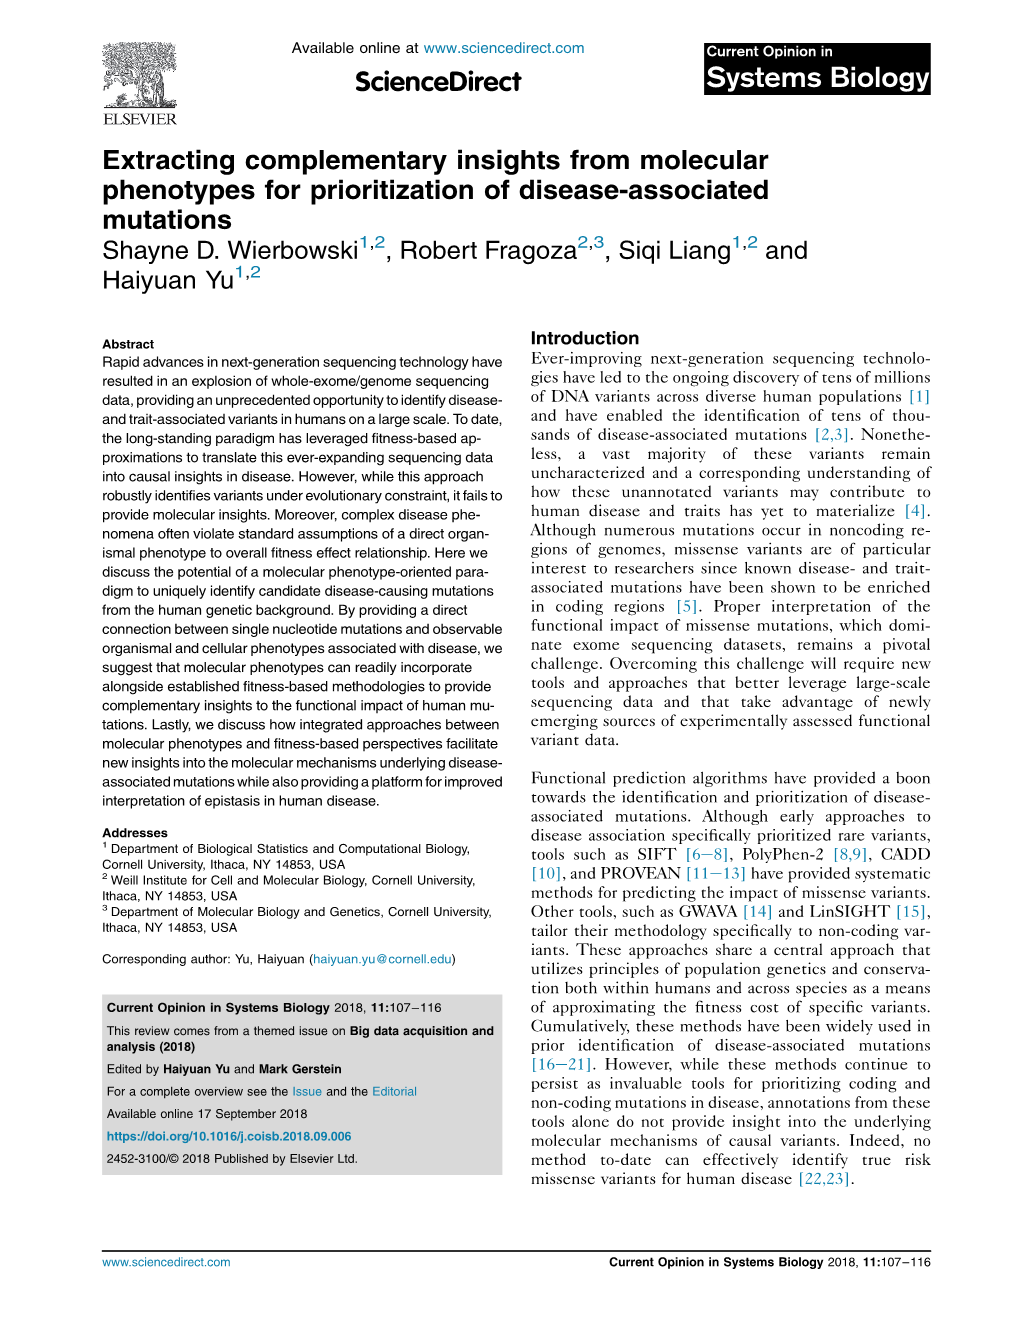 Extracting Complementary Insights from Molecular Phenotypes for Prioritization of Disease-Associated Mutations Shayne D